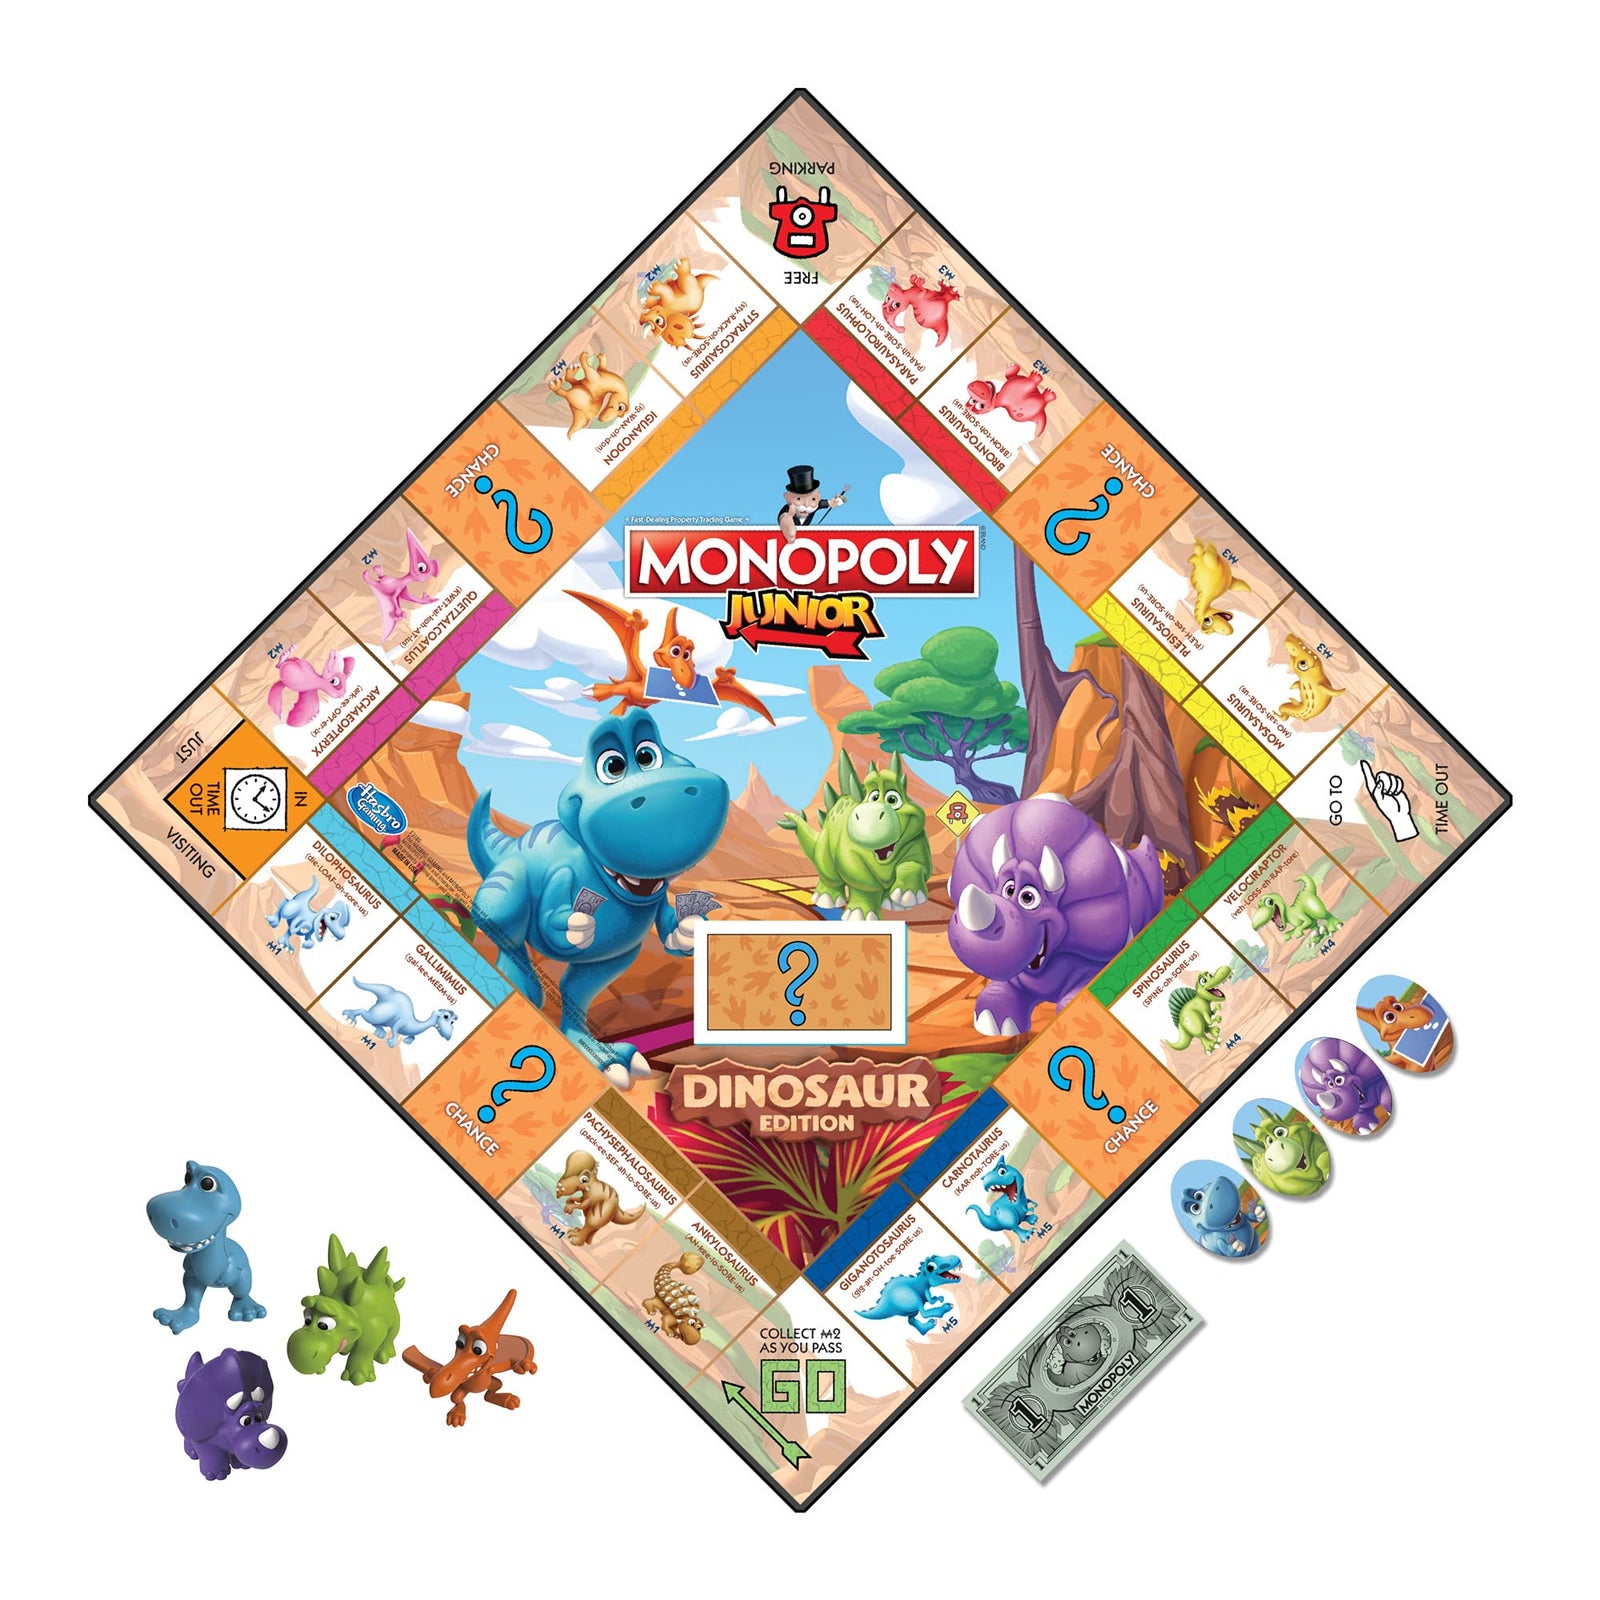 Hasbro Gaming Monopoly Junior: Dinosaur Edition Board Game for 2-4 Players, Fun Indoor Games for Kids Ages 5 and Up, Dinosaur Theme (Amazon Exclusive)